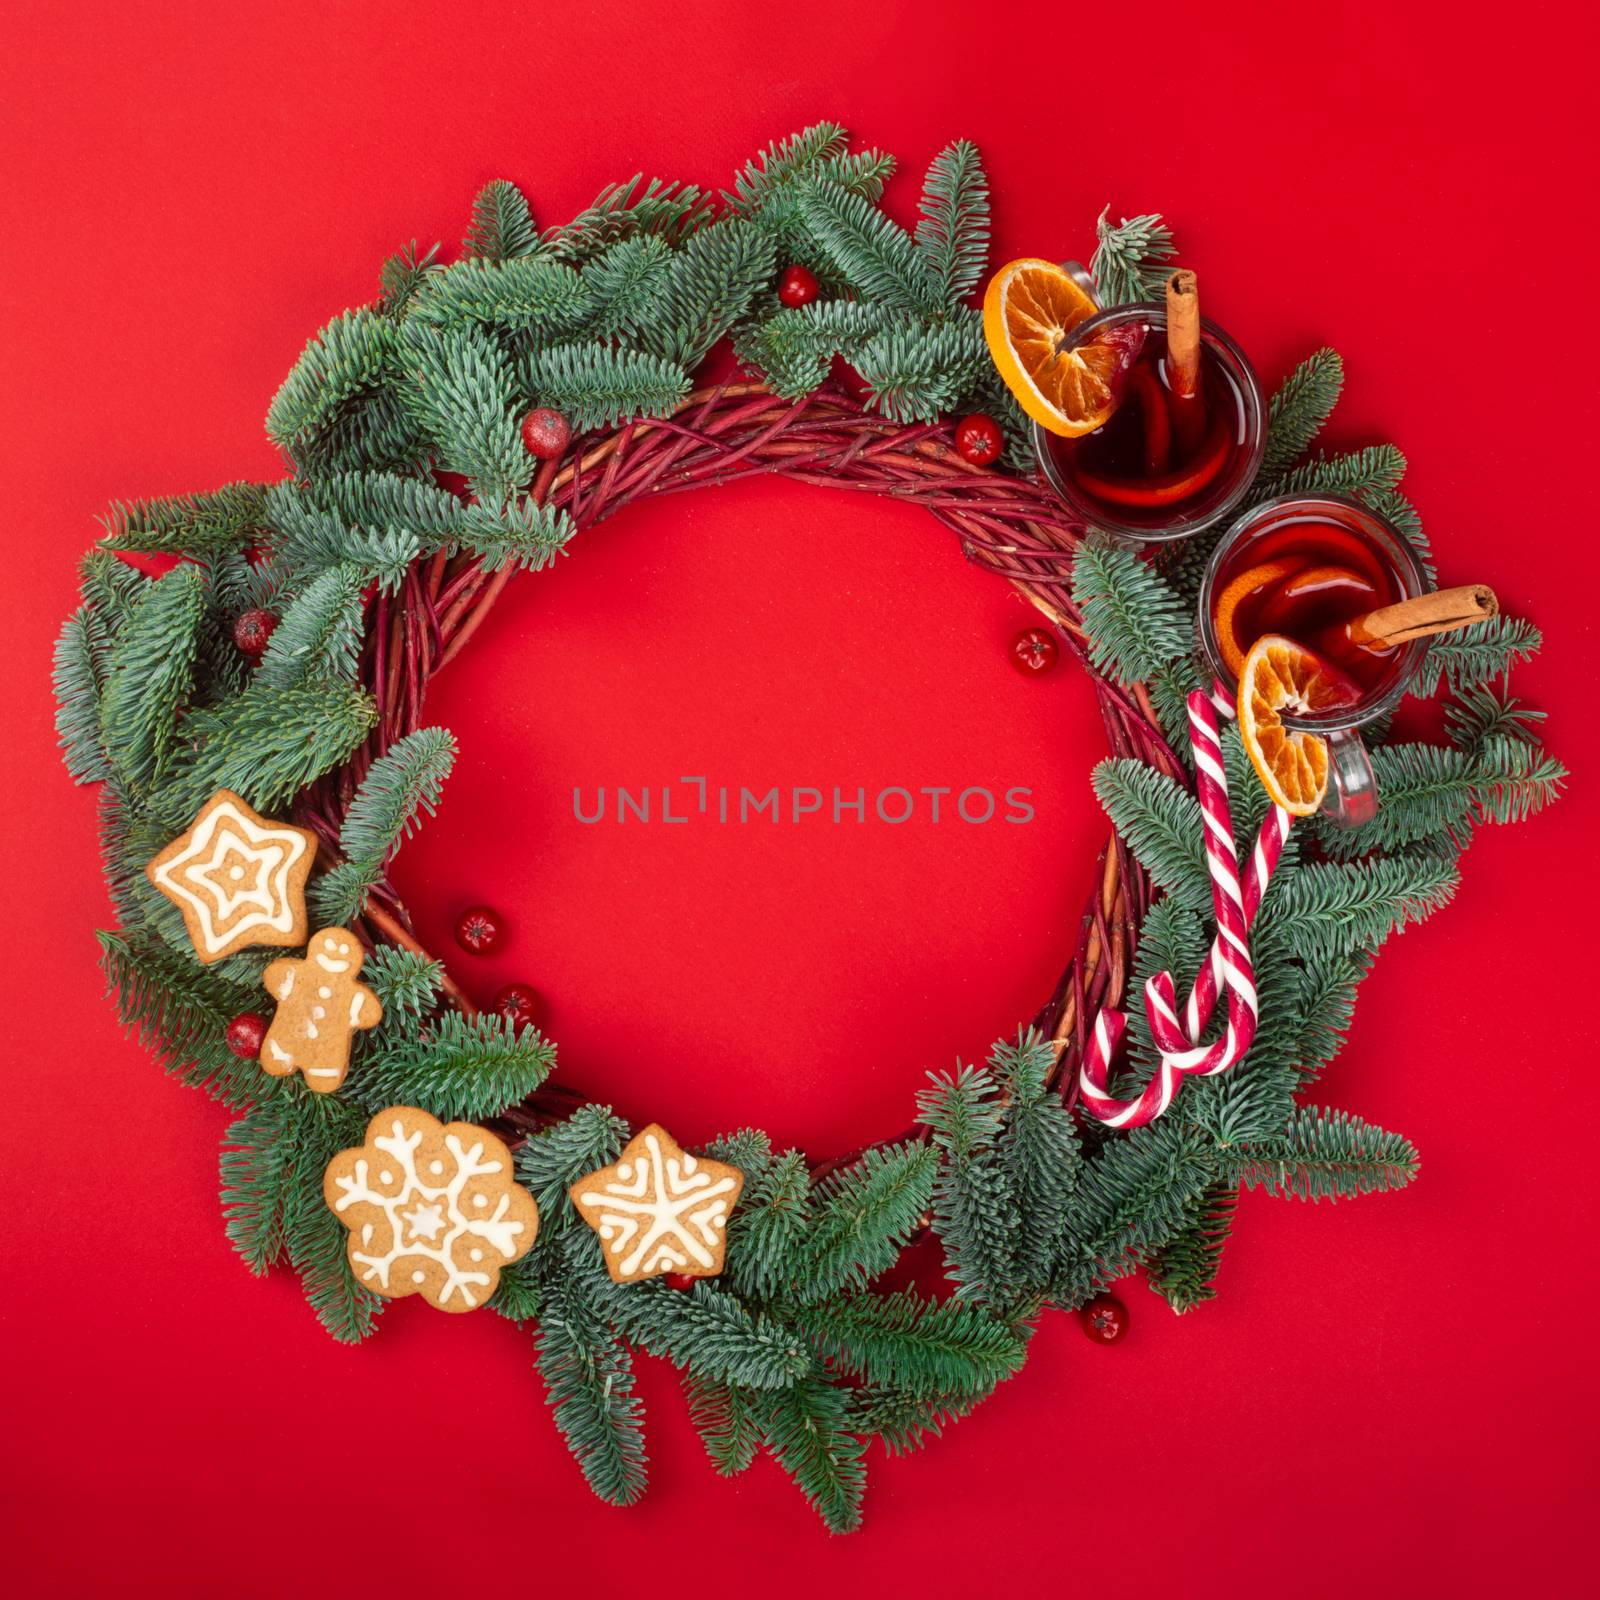 Christmas decorative wreath with noble fir tree twigs pine cones mulled wine and gingerbread cookies on red paper background with copy space for text